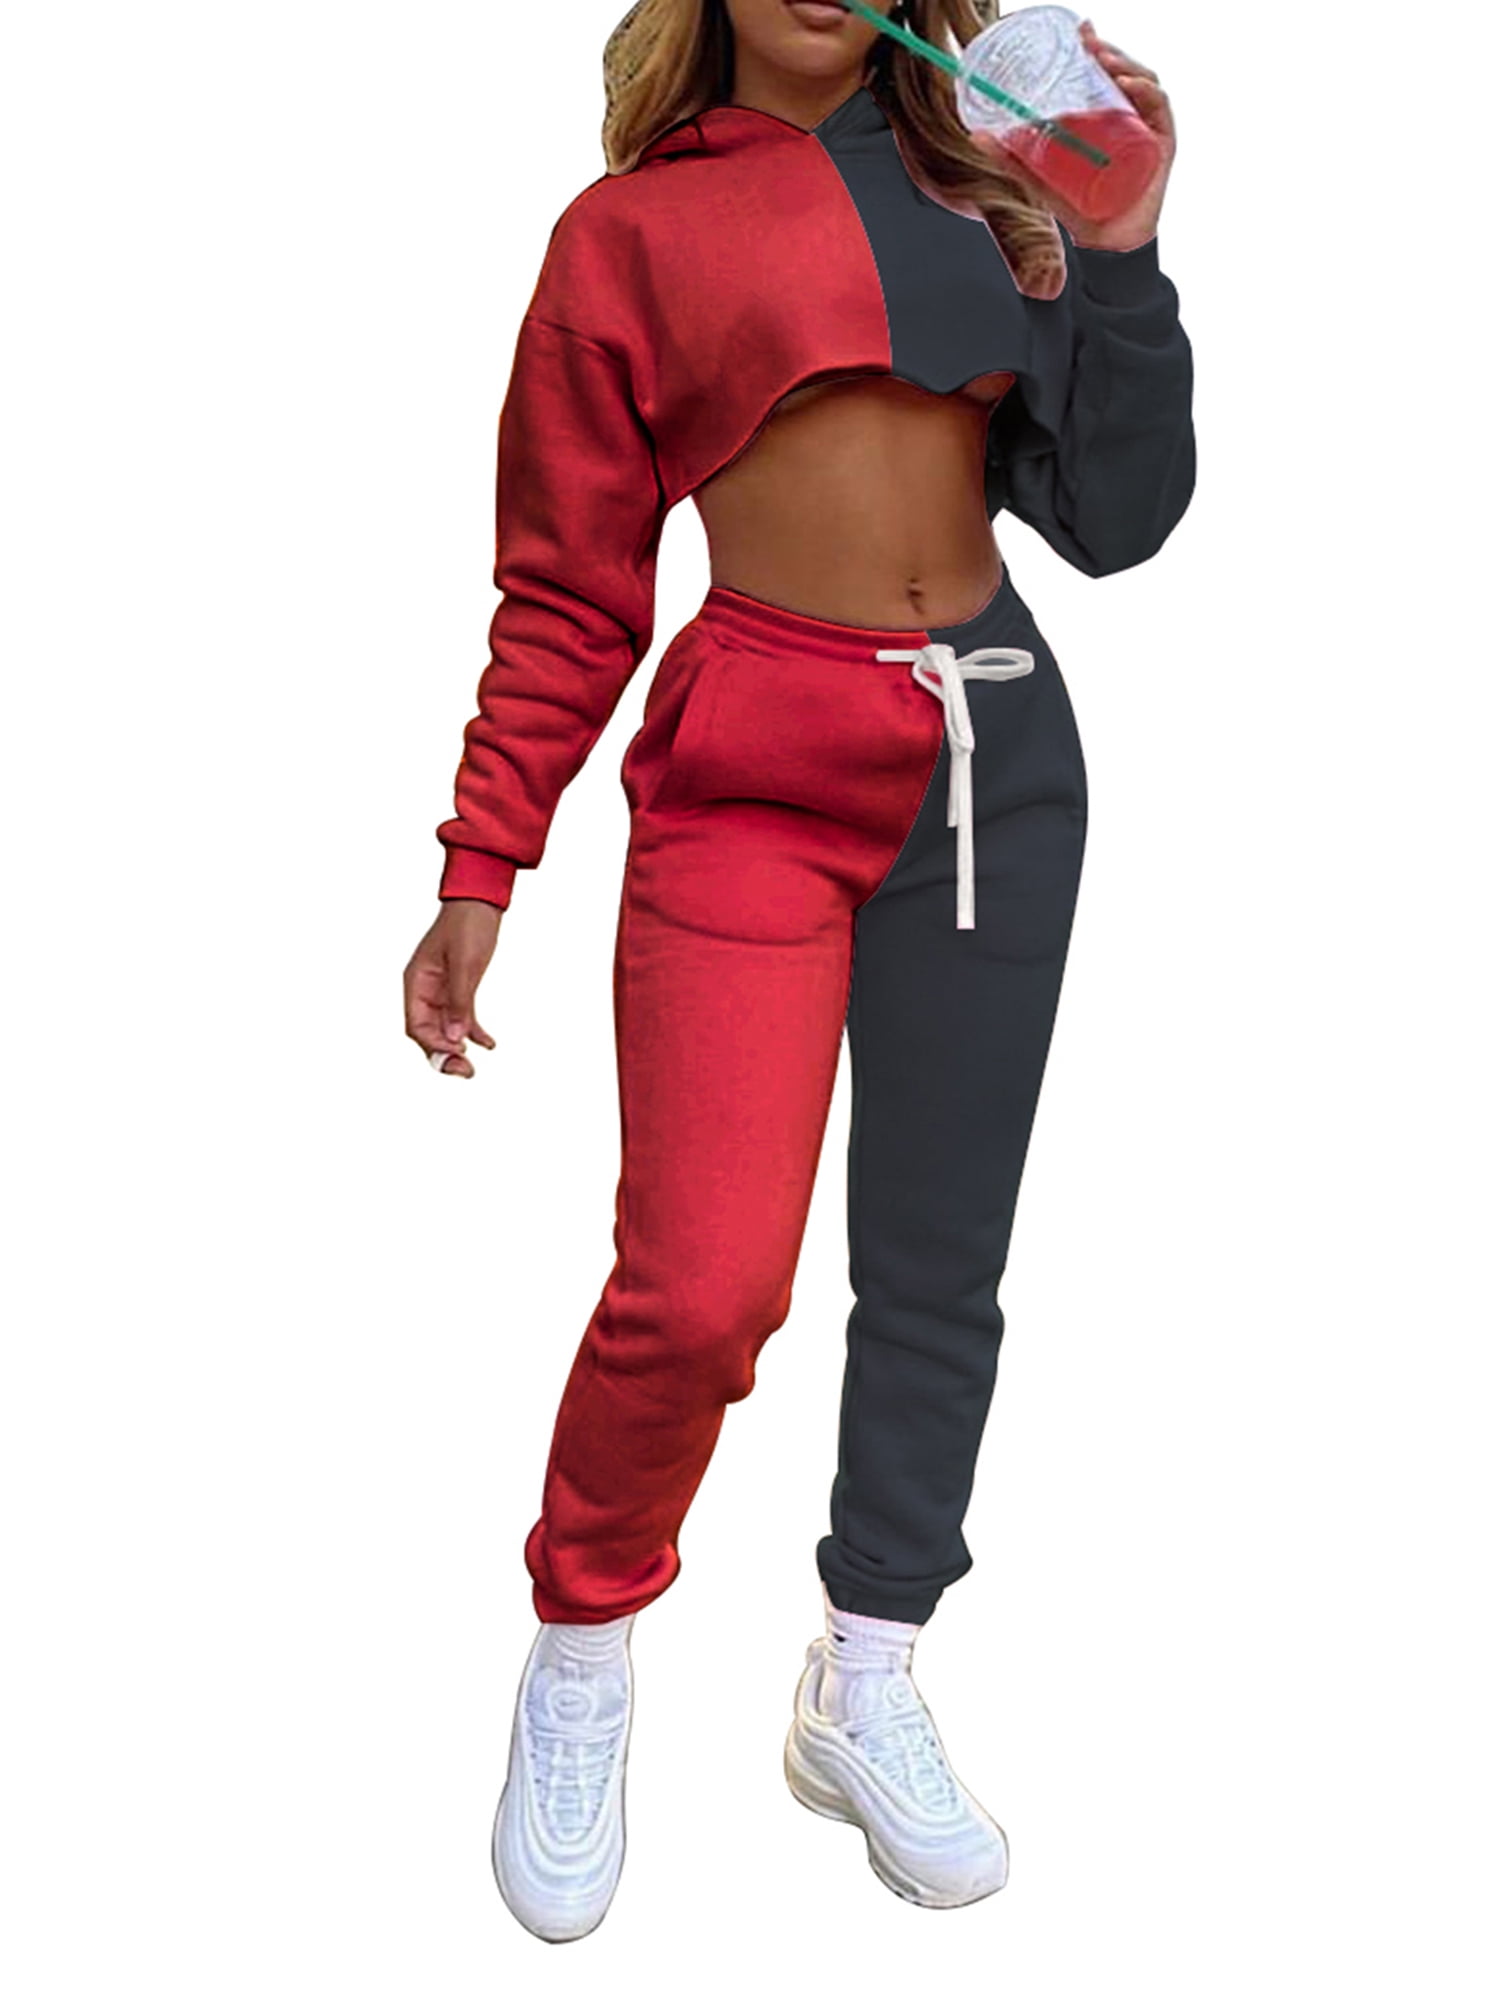 Cutiefox Women‘s Casual Crop Top Pullover Hooded Sport Sweatsuits 2 Piece Jogger Outfit 